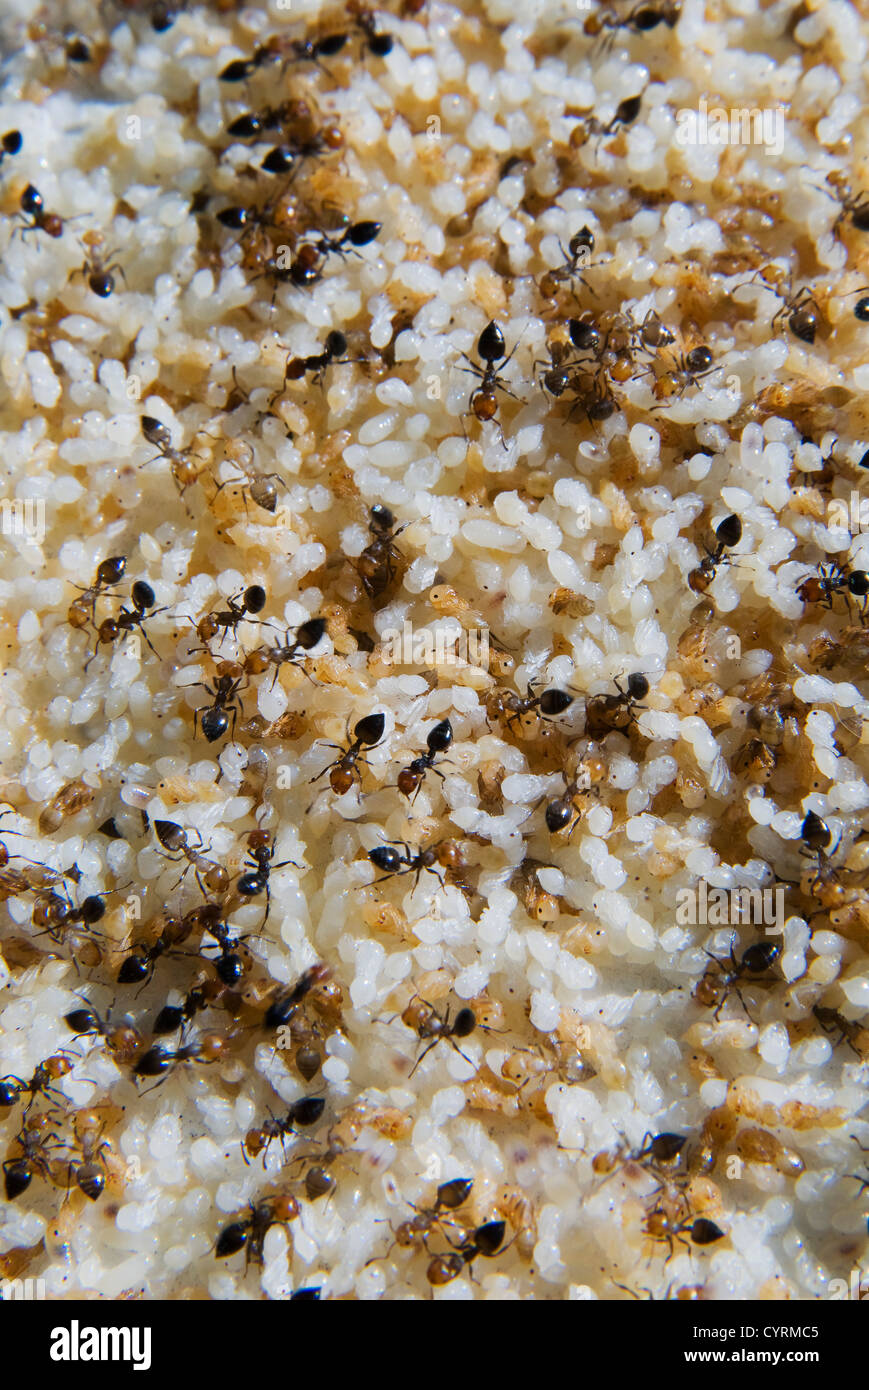 A colony of ants with eggs (Crematogaster Scutellaris) Stock Photo